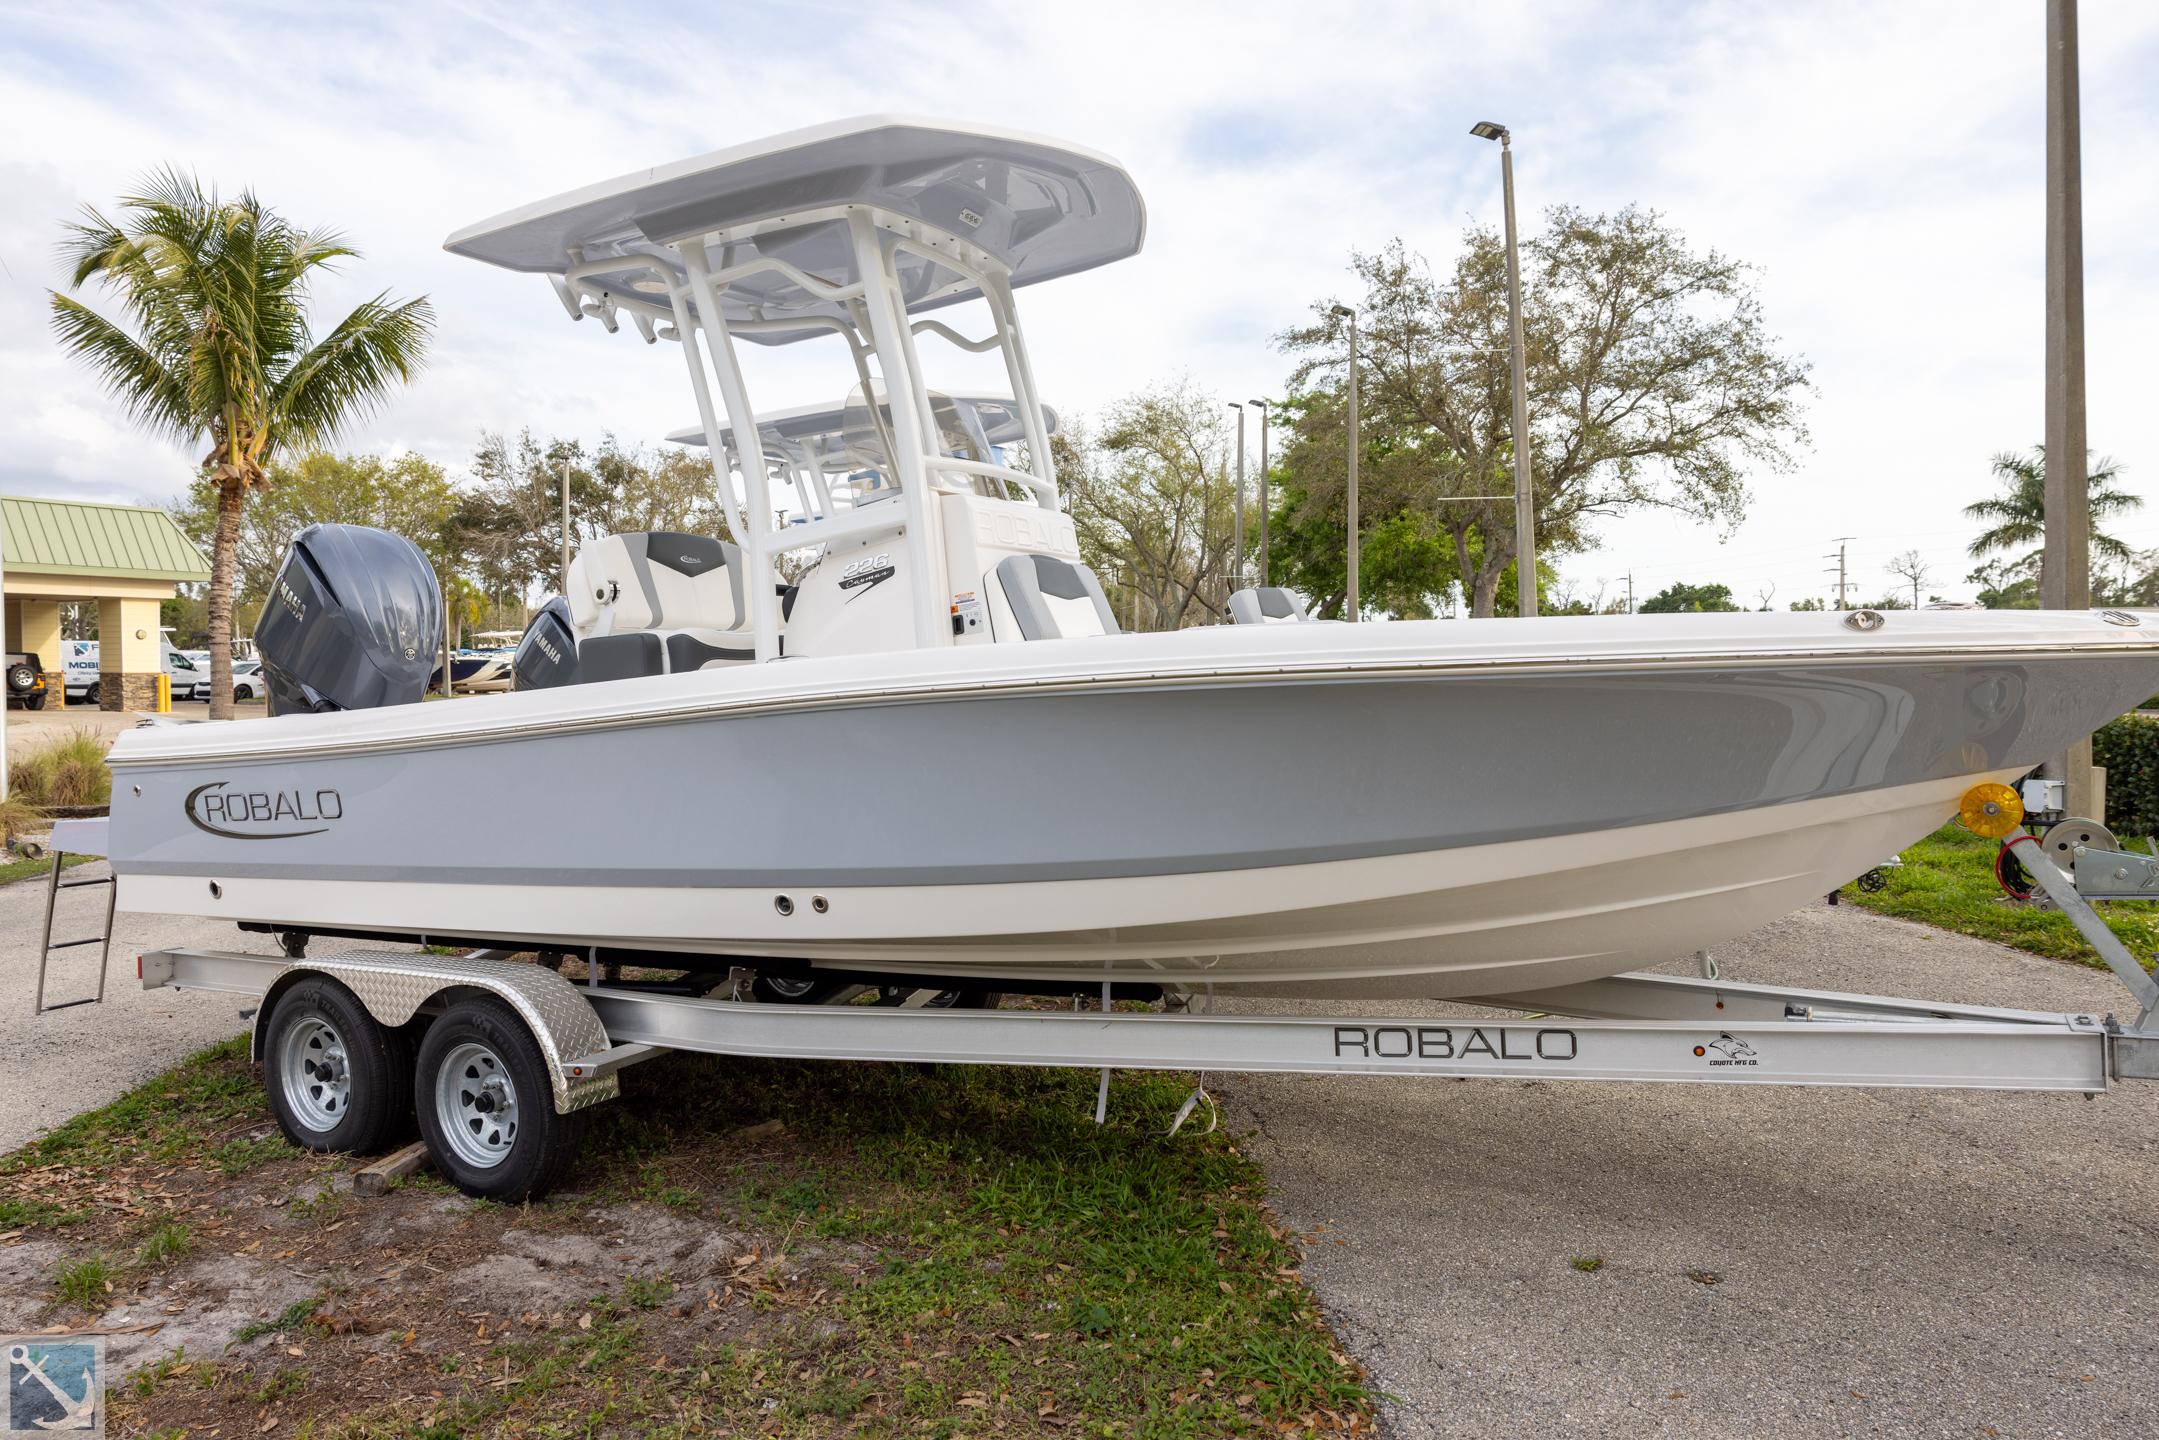 Explore Robalo 226 Cayman Boats For Sale - Boat Trader